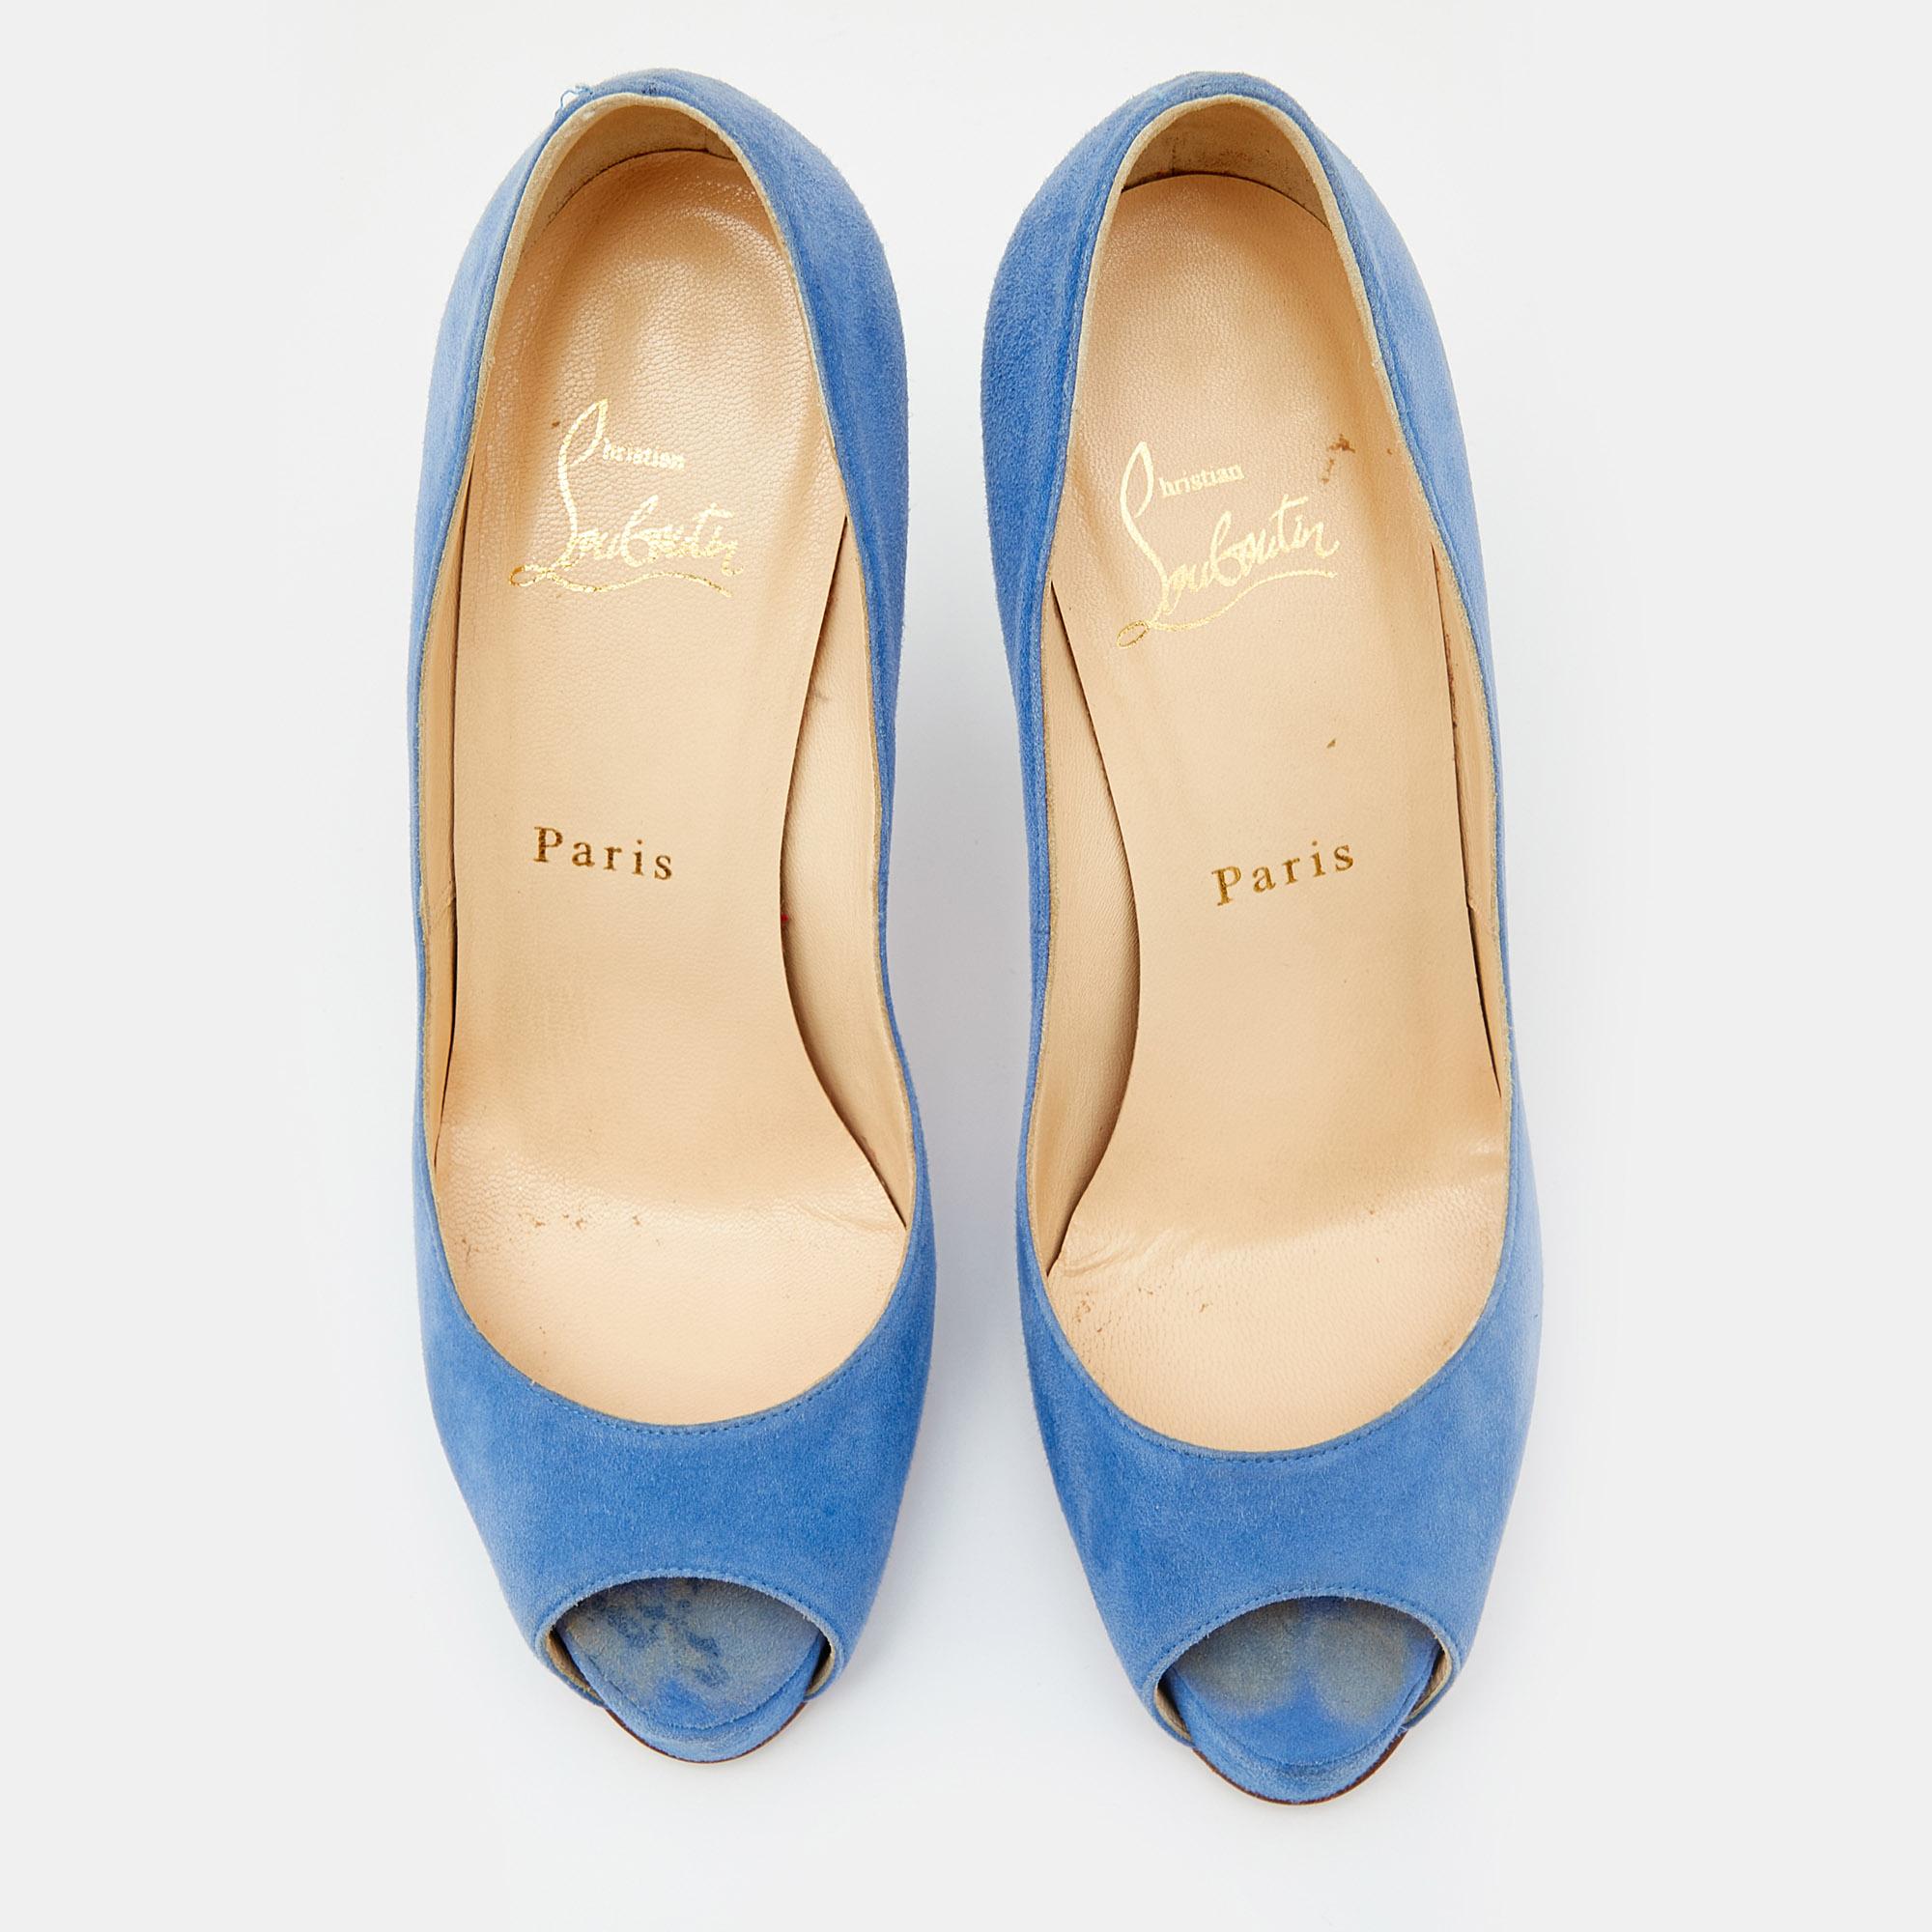 This pair of Christian Louboutin pumps is a timeless classic. Step out in style while flaunting these blue suede pumps, ideal for summer outings. They feature peep toes, platforms, and 11.5 cm heels.

